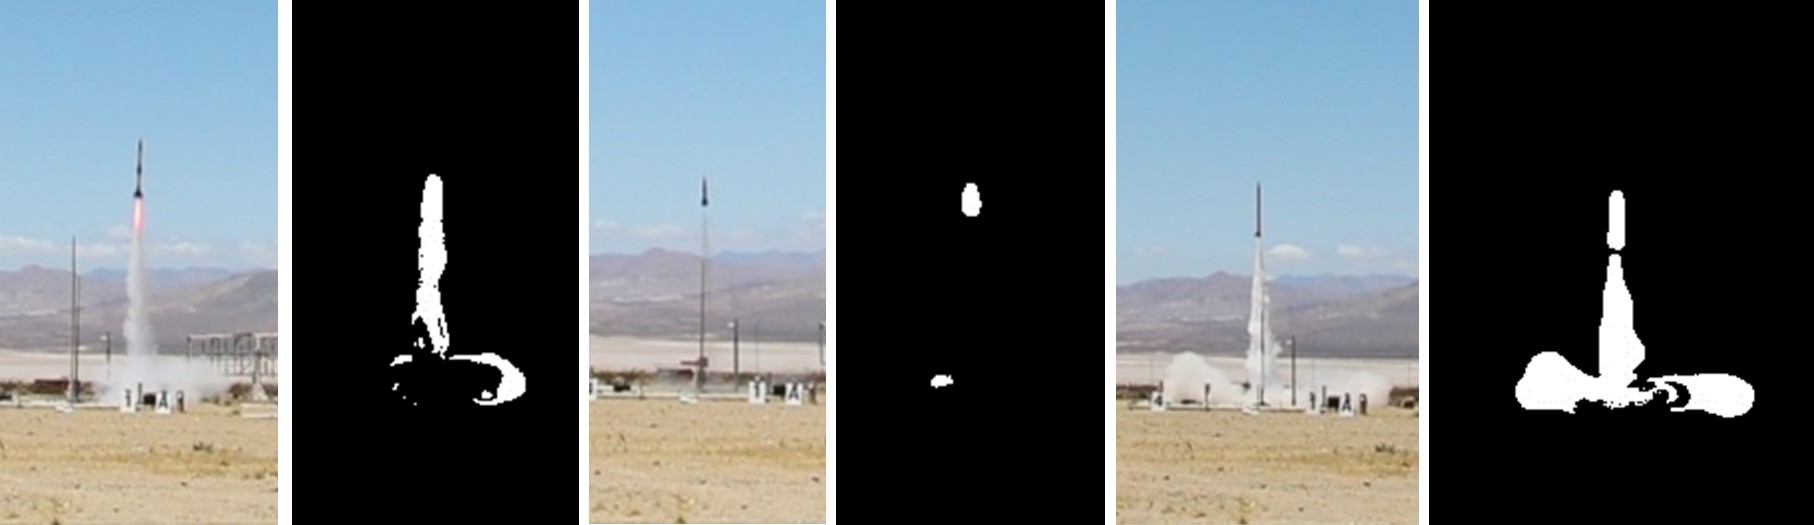 Figure E. Missile launches and the corresponding background subtraction frames.